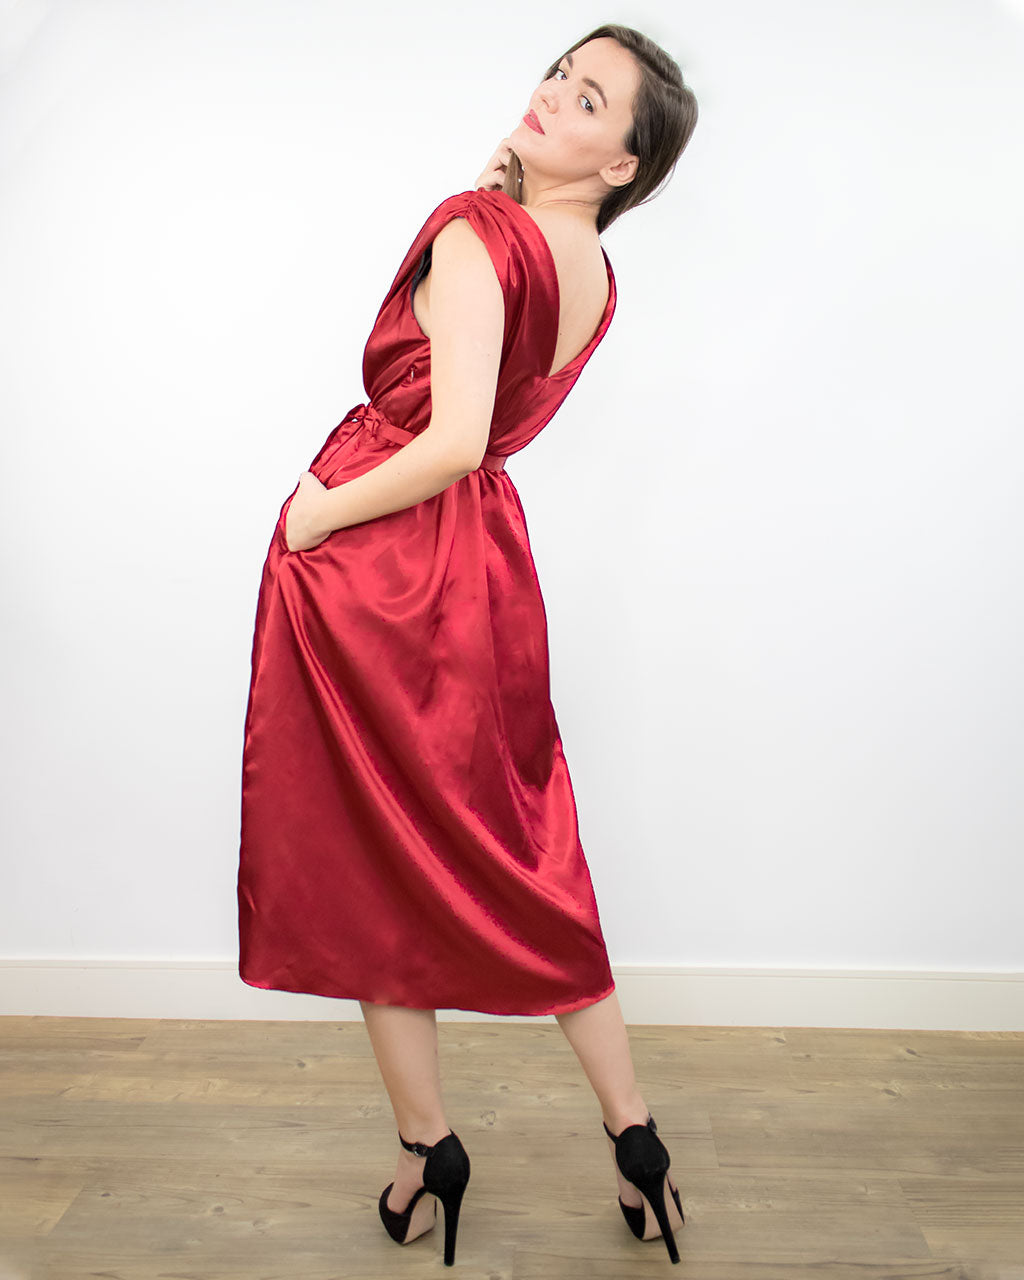 Sustainable ethical satin silk red wrap ruched dress for formal cocktail party or wedding with belt made from recycled PET